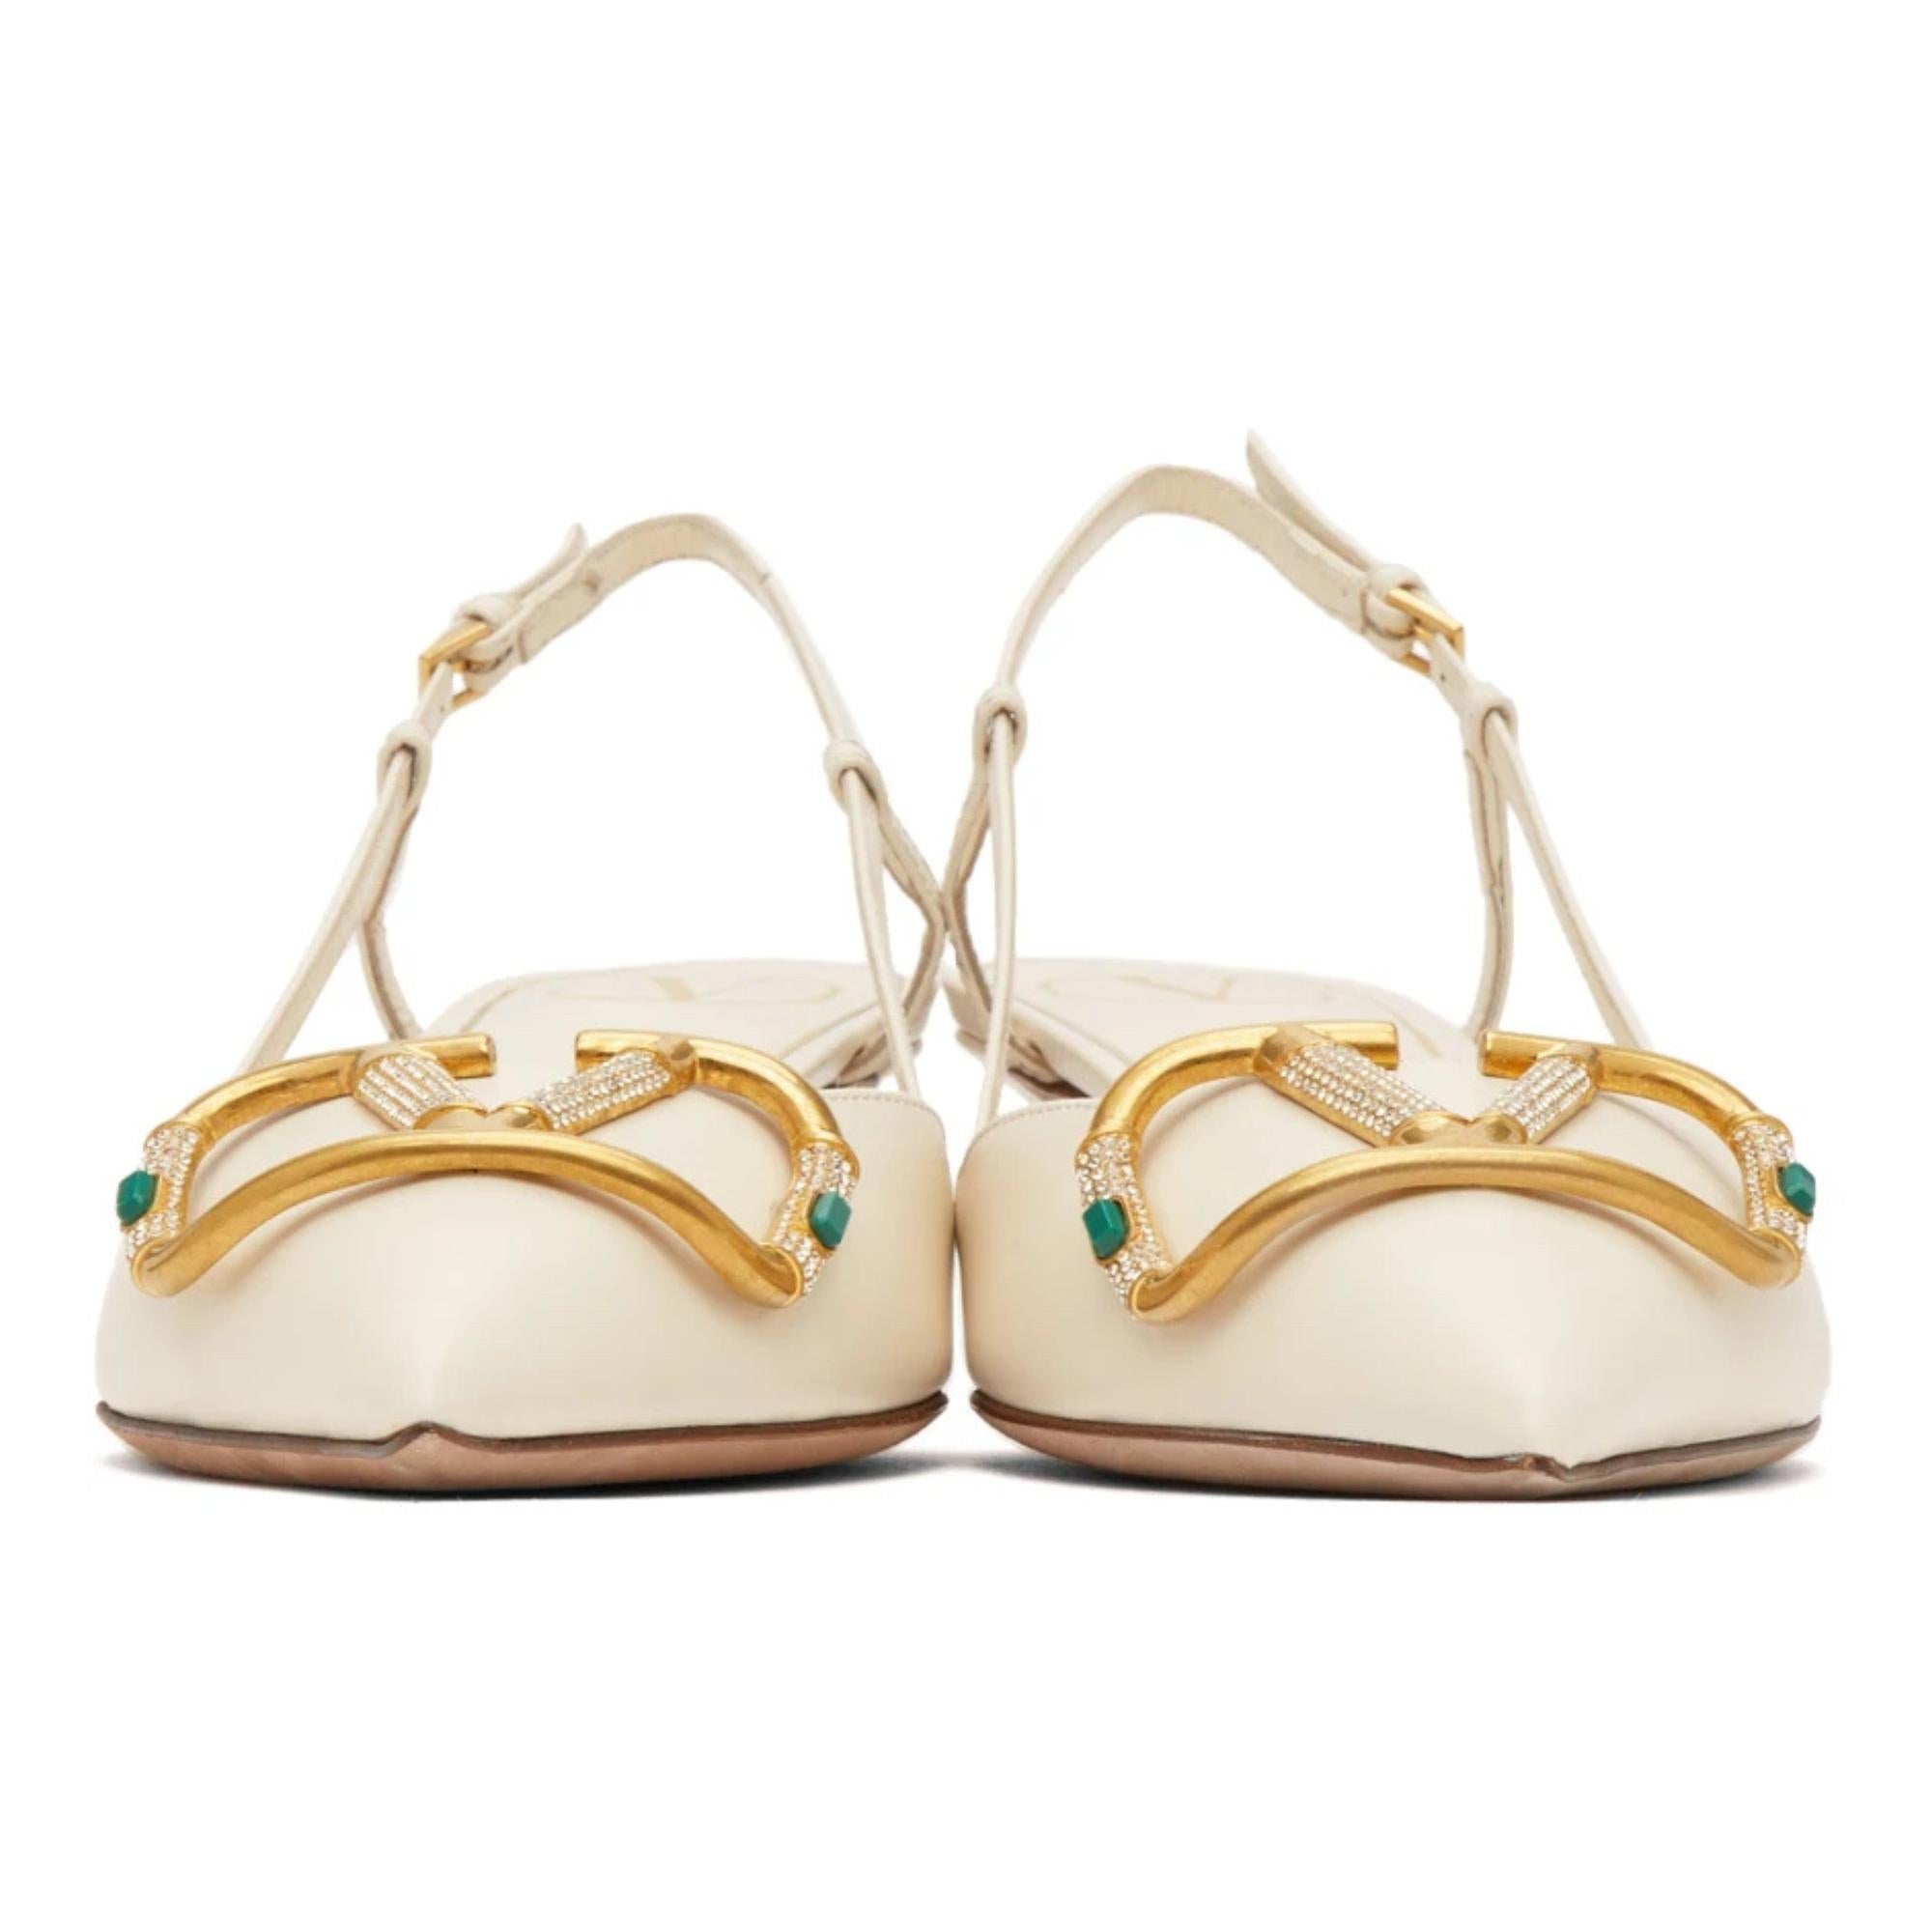 Color: White/cream
Material: Leather
Size: 37.5 EU
Heel Height: 50 mm / 2”
Condition: Very good. Marks, scraps and stains to the bottoms. Hairline marks to the leather on uppers. Overall minimal signs of use to the uppers.
Comes with: Dust Bag, Box